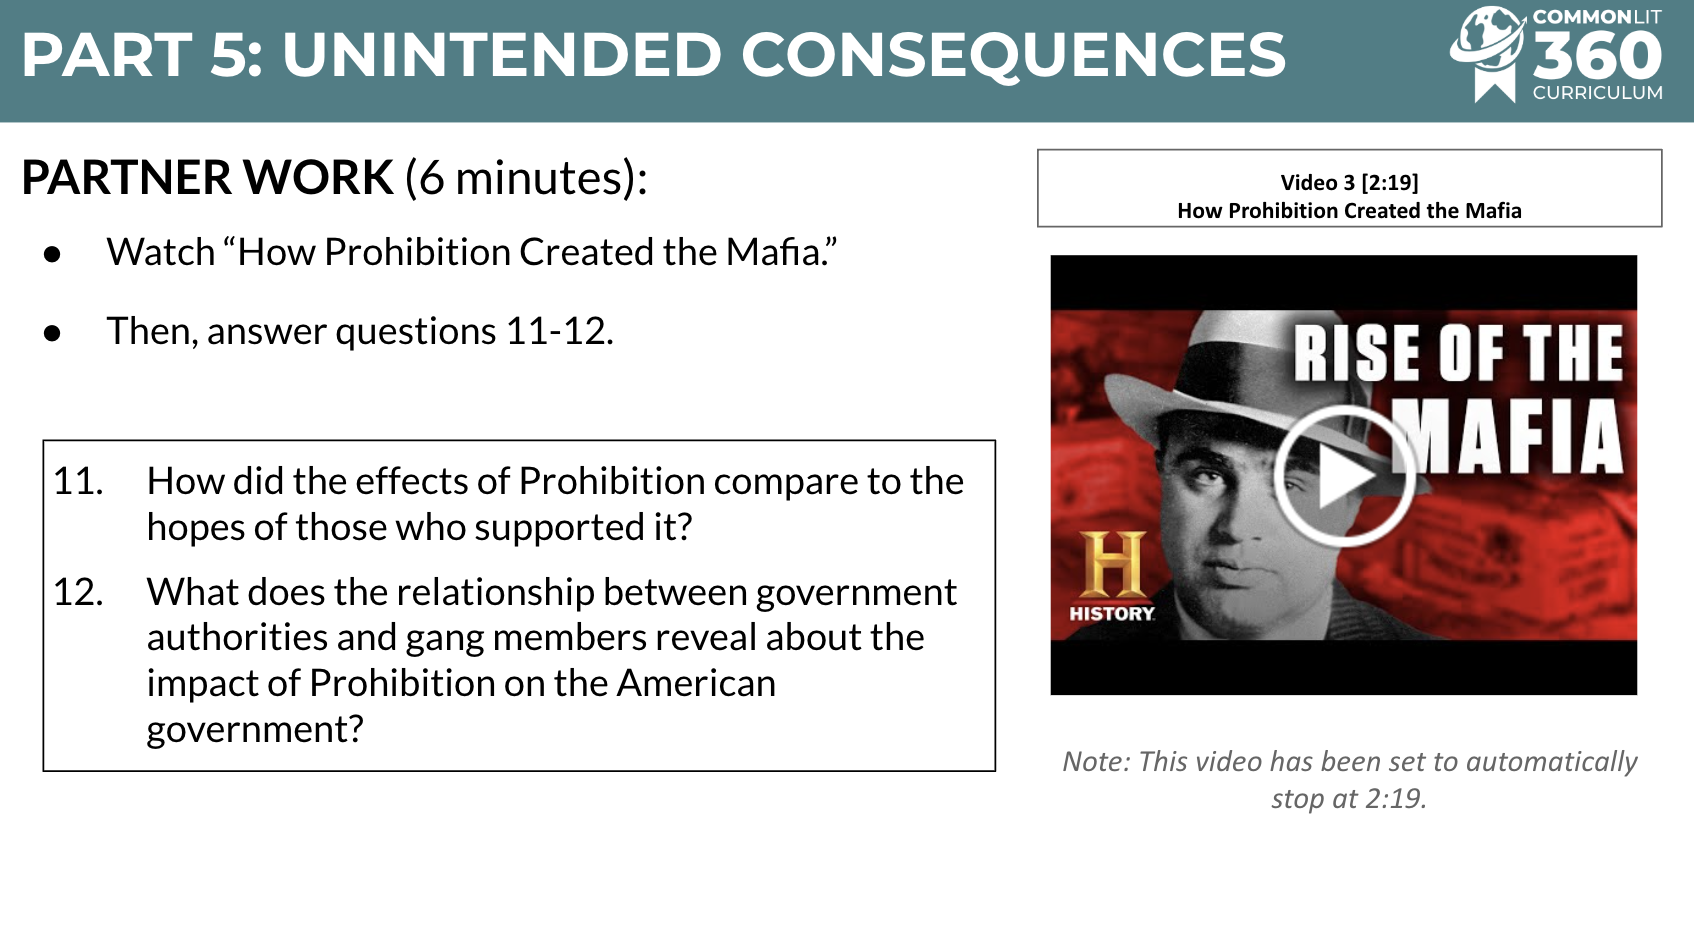 A screenshot of the Related Media Exploration, including questions about a video on how prohibition created the mafia.